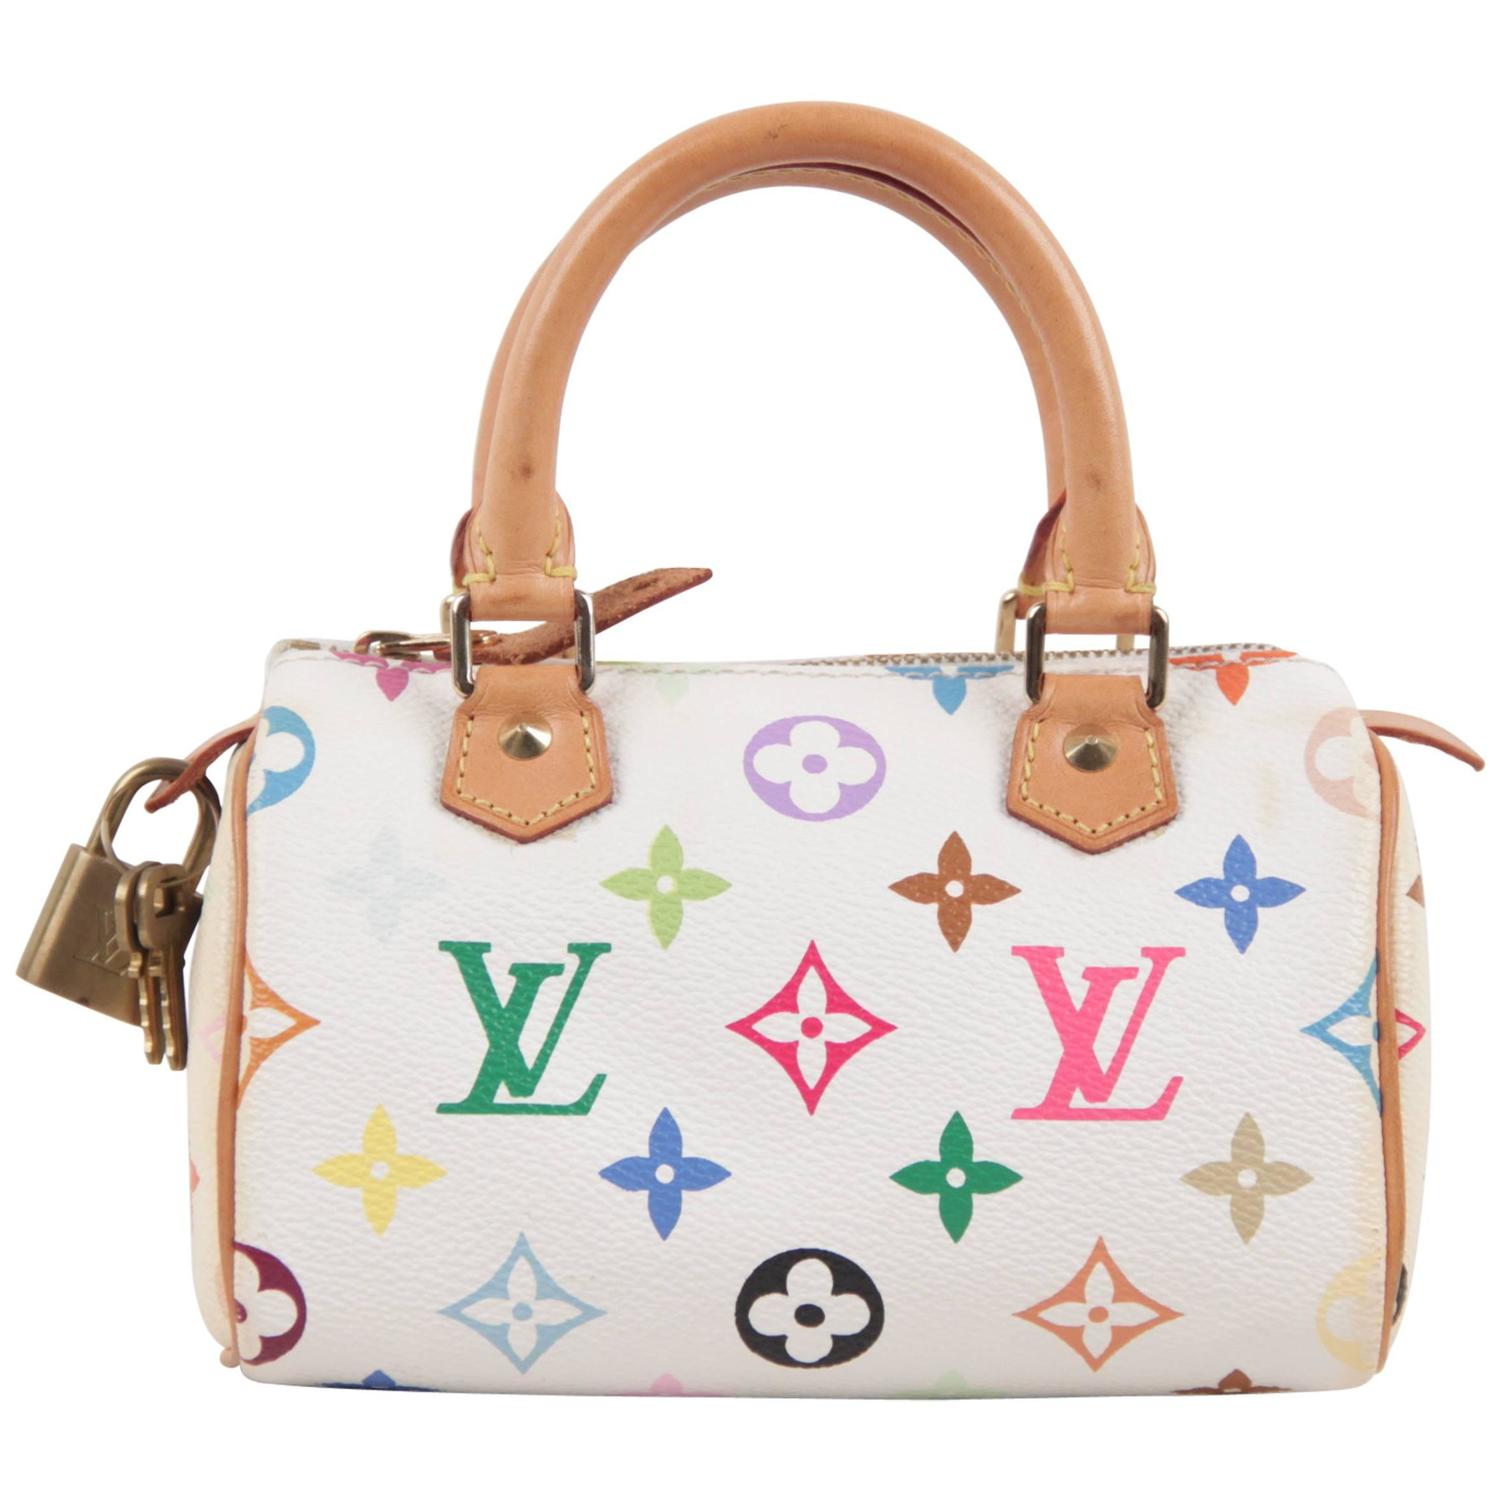 Louis Vuitton Small Bag White | Confederated Tribes of the ...